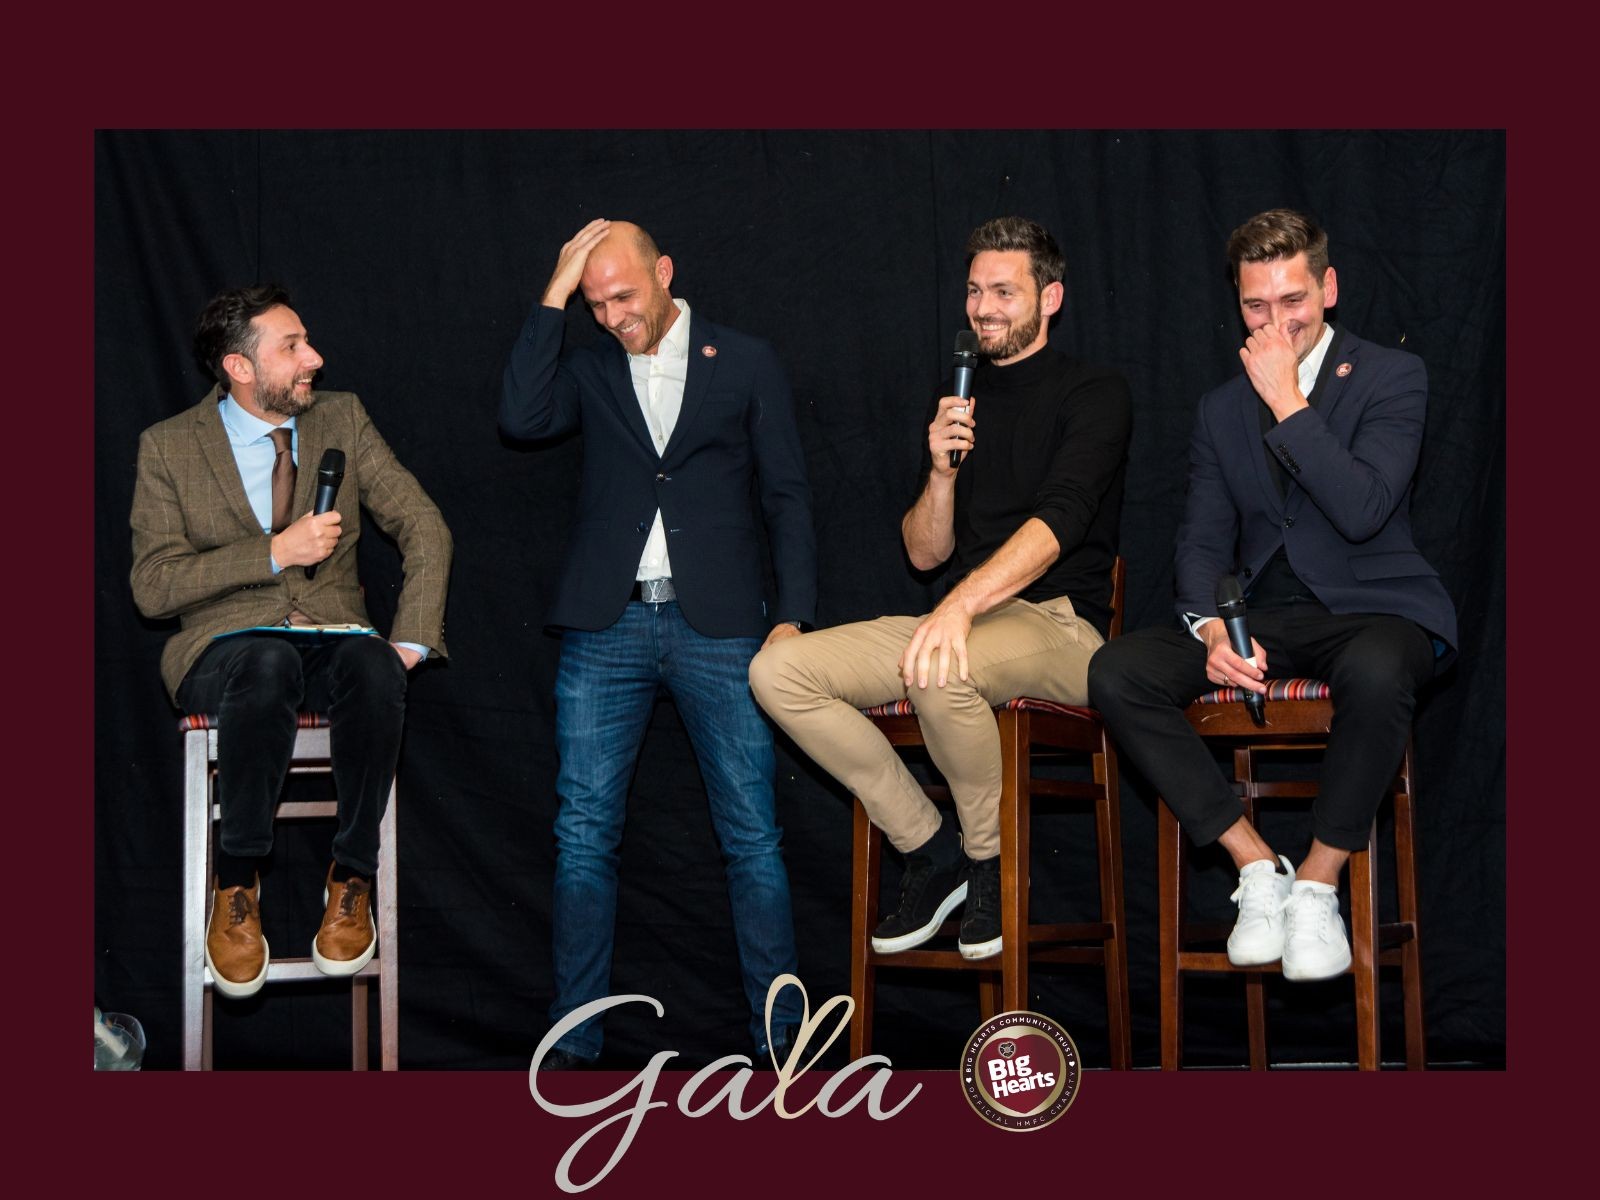  » BIG HEARTS GALA: OVER £10,000 RAISED AT OUR SECOND GALA FUNDRAISER!